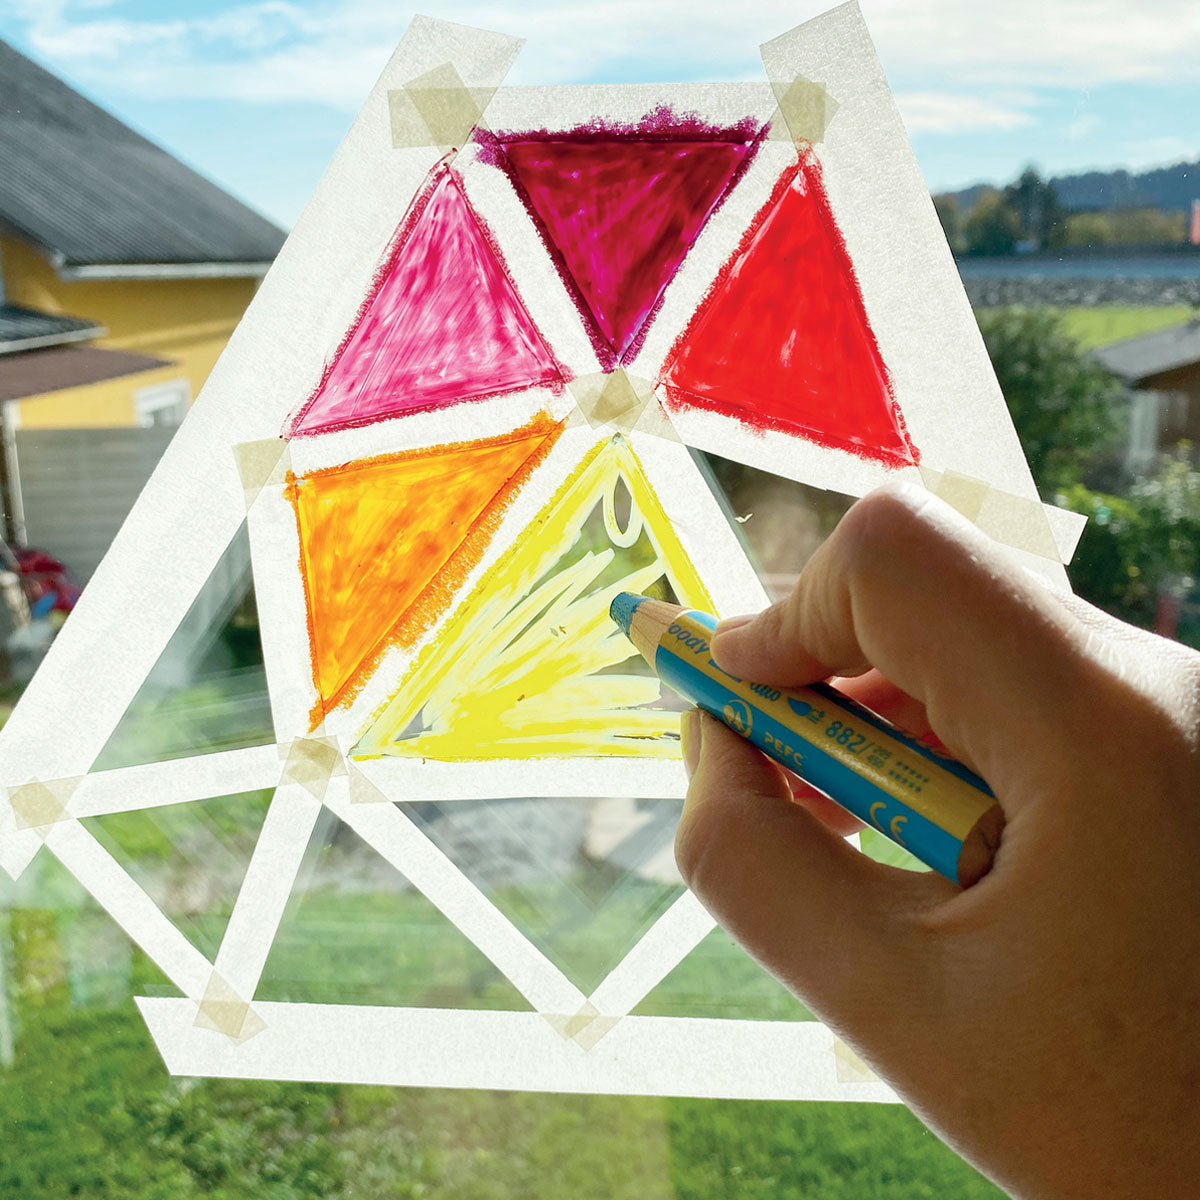 A hand holding a Stabilo pencil coloring on a window.  The window has masking tape placed to divide sections into triangles that are partially colored in with a variety of colors. You can see a neighborhood in the background, slightly blurry.